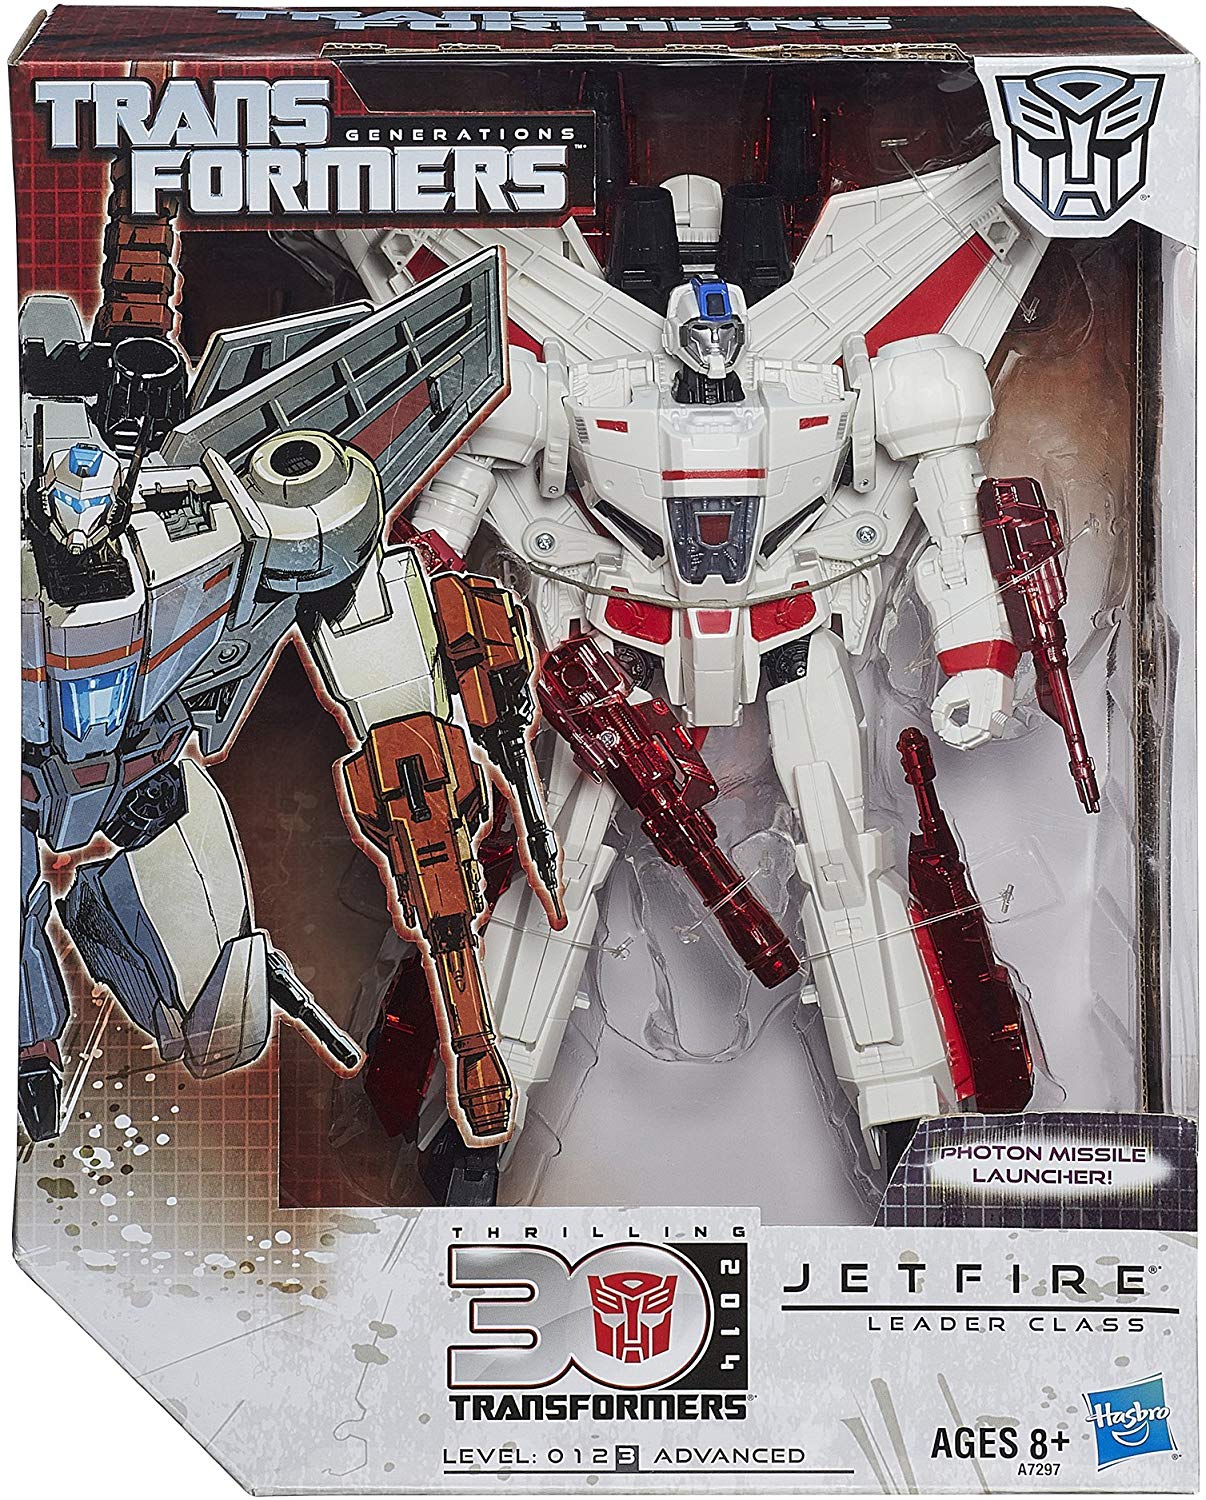 Transformers Generations Thrilling 30 Leader Class Jetfire Action Figure 1